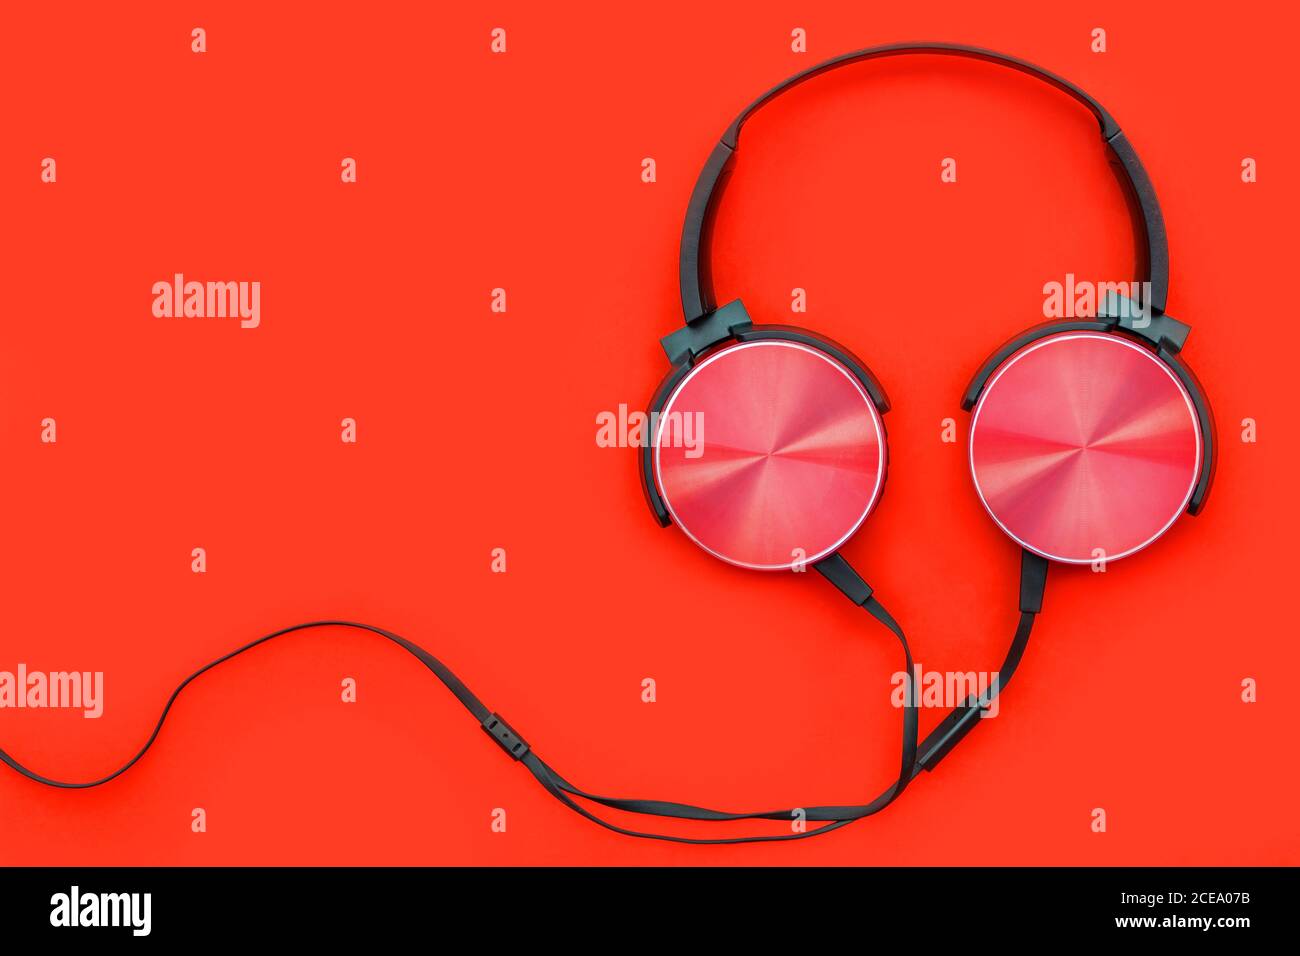 Modern red headphone on red background. Music concept. Stock Photo